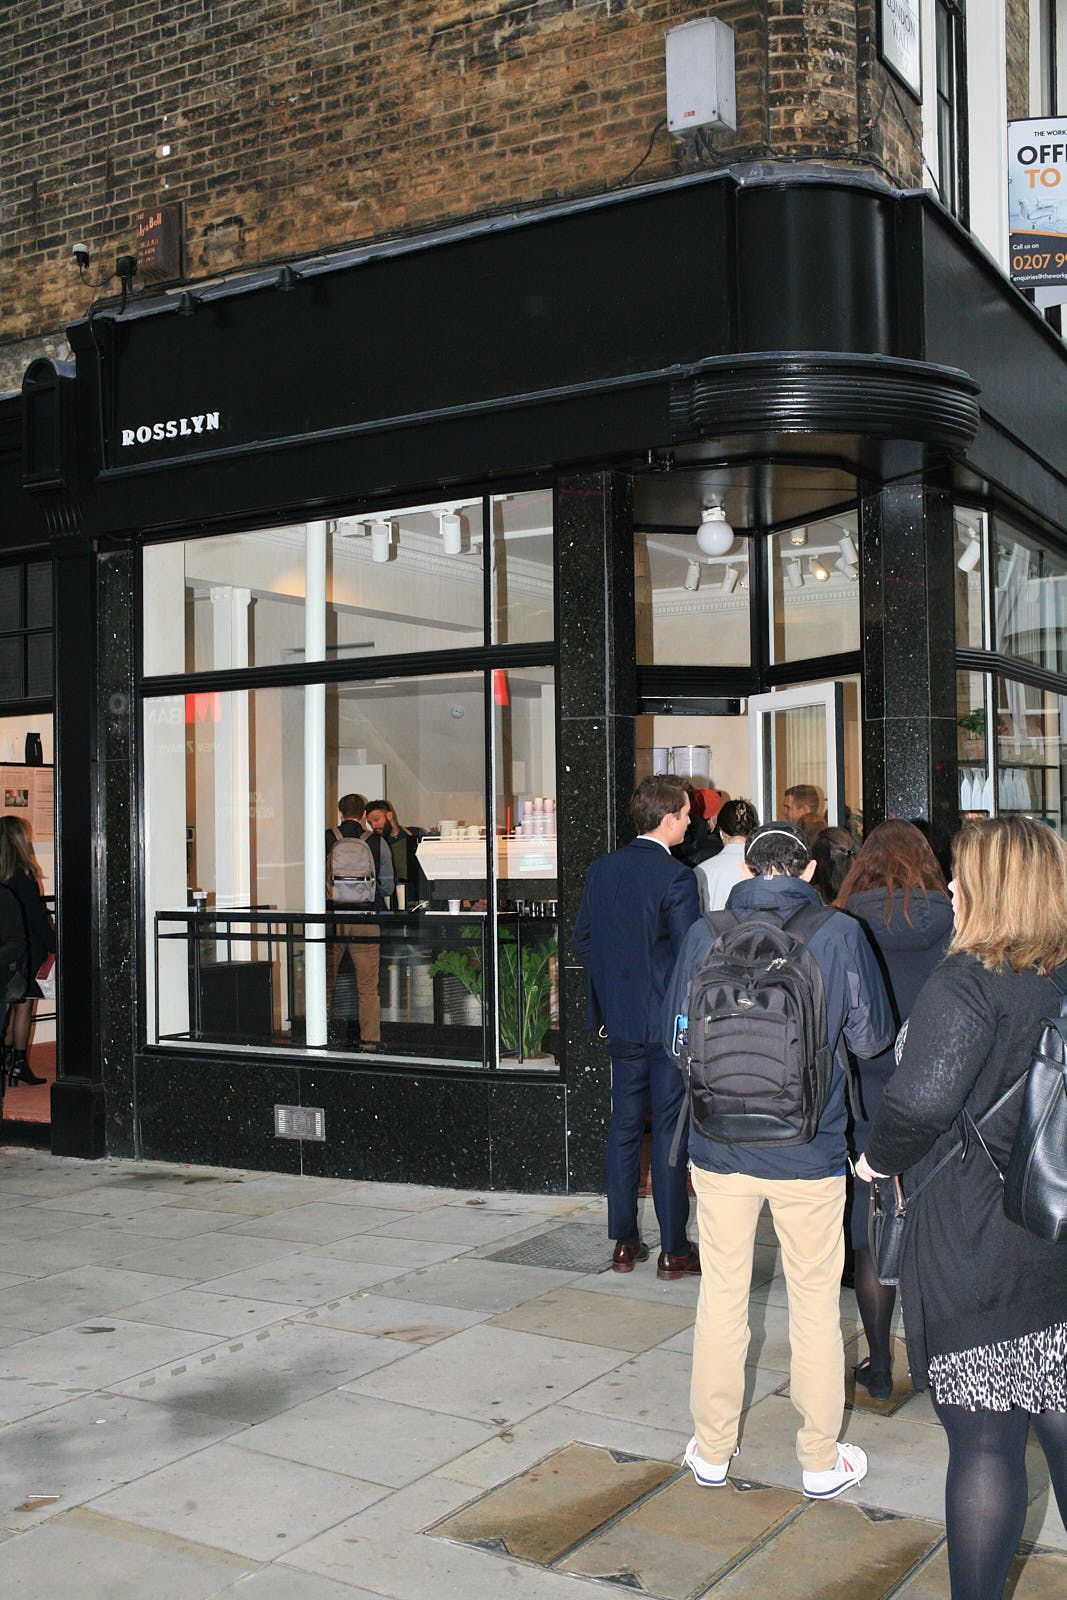 A queue out the door of Rosslyn Coffee on London Wall in Moorgate.